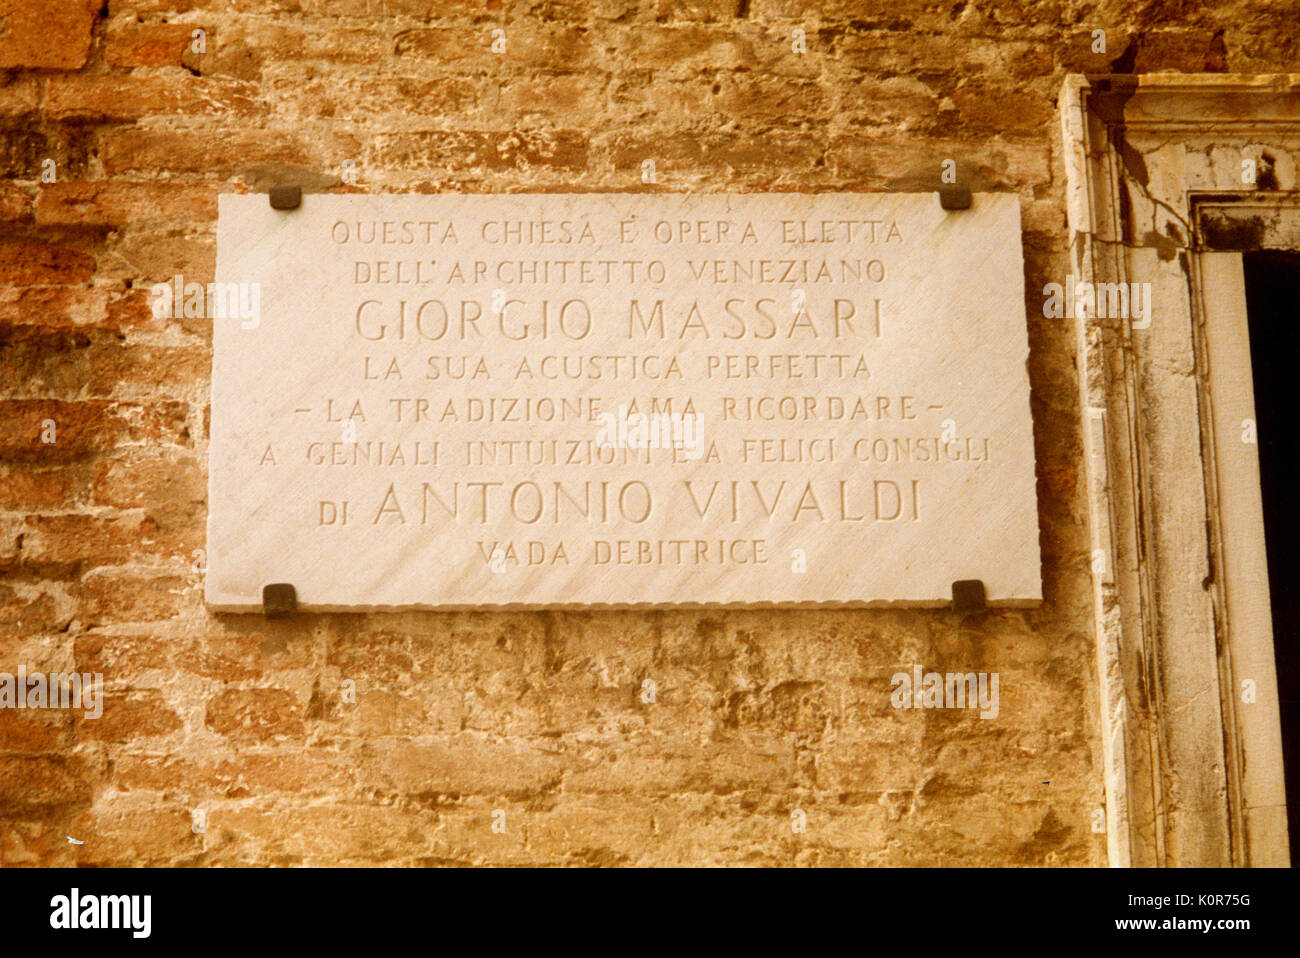 Vivaldi Plaque at church of Pieta. Architect Massari consulted Vivaldi about ideal acoustics for his music even though the church not completed until 10 years after Vivaldi's death.   Italian composer & violinist, 1678-1741 Stock Photo